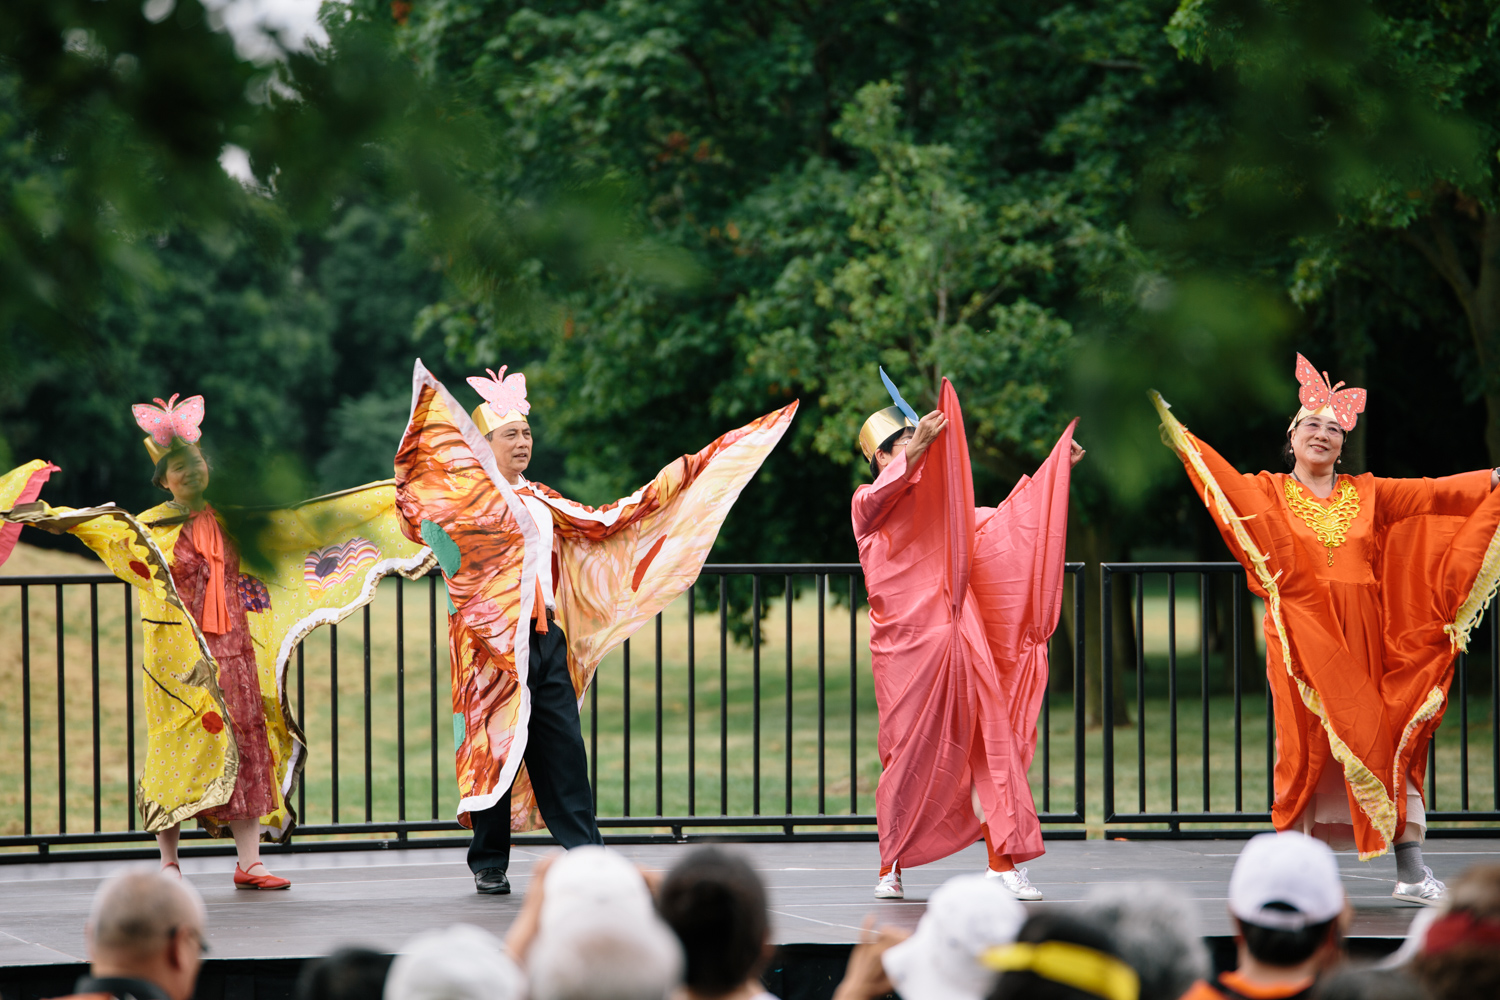 Four women in colourful draped costumes dance on stage.